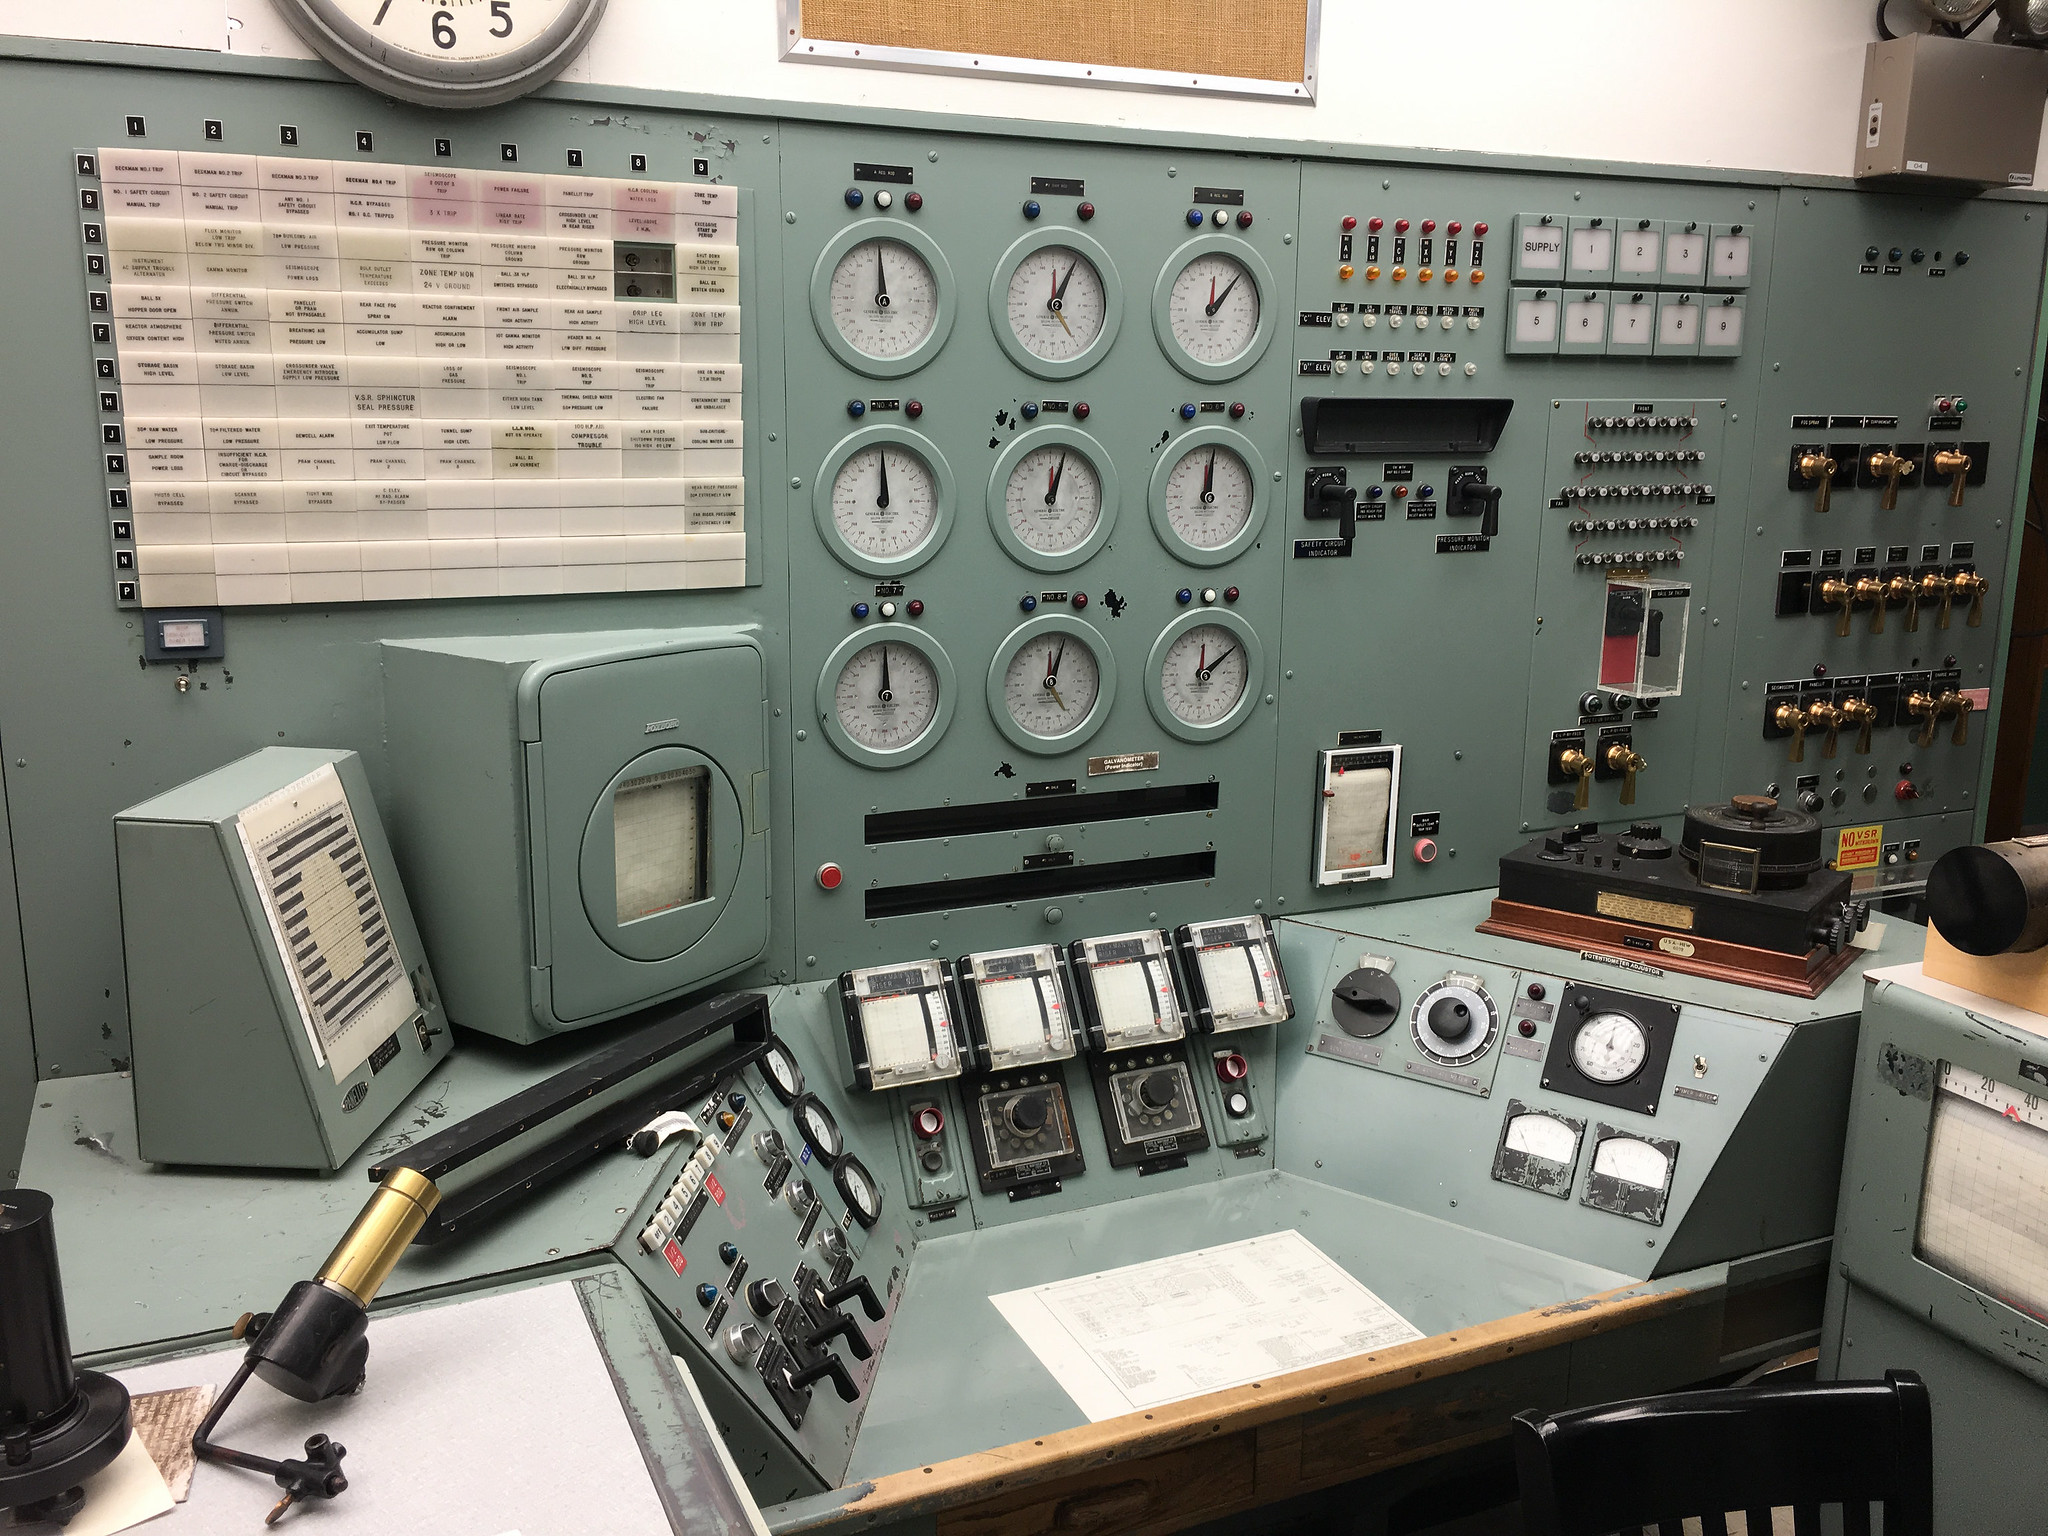 Close-up of switches, dials, and buttons in the B Reactor Control Room